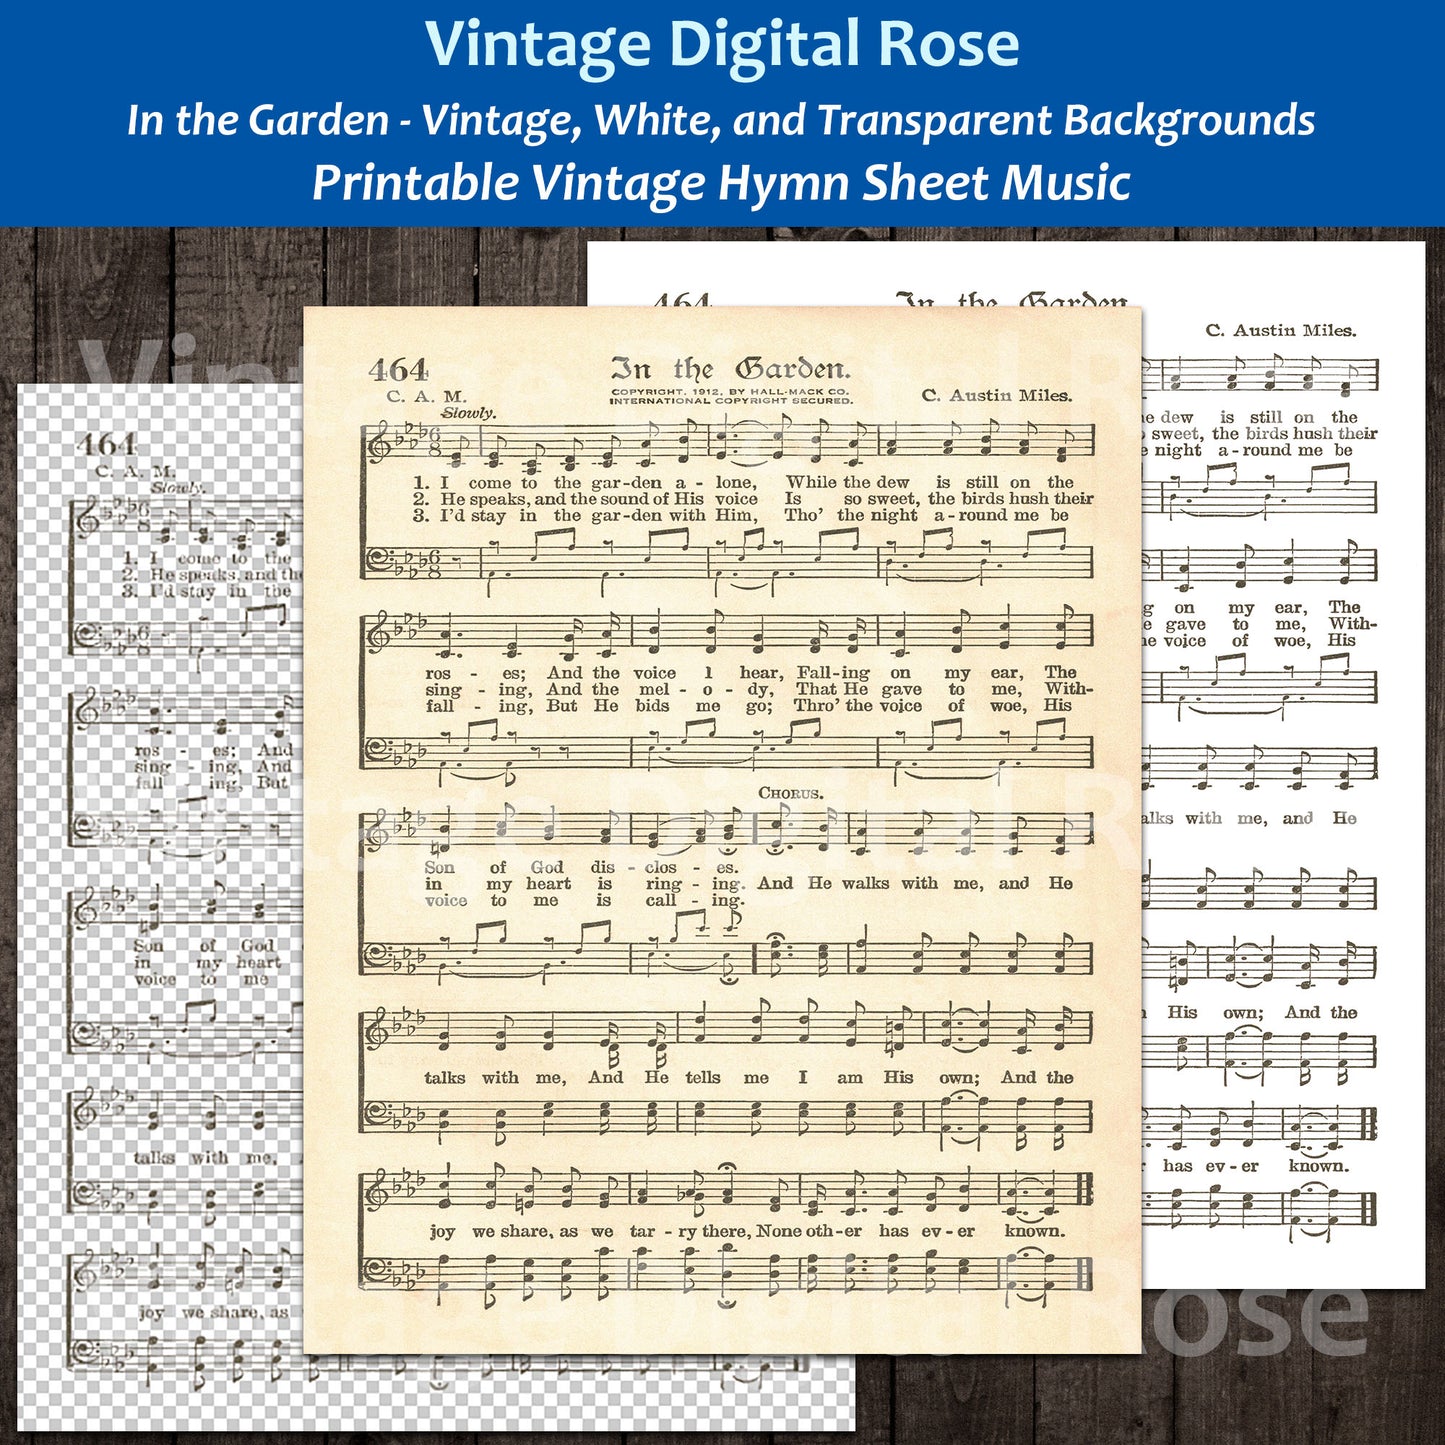 In the Garden Printable Vintage Hymn Sheet Music - Vintage, White, and Transparent Backgrounds JPG PNG Files